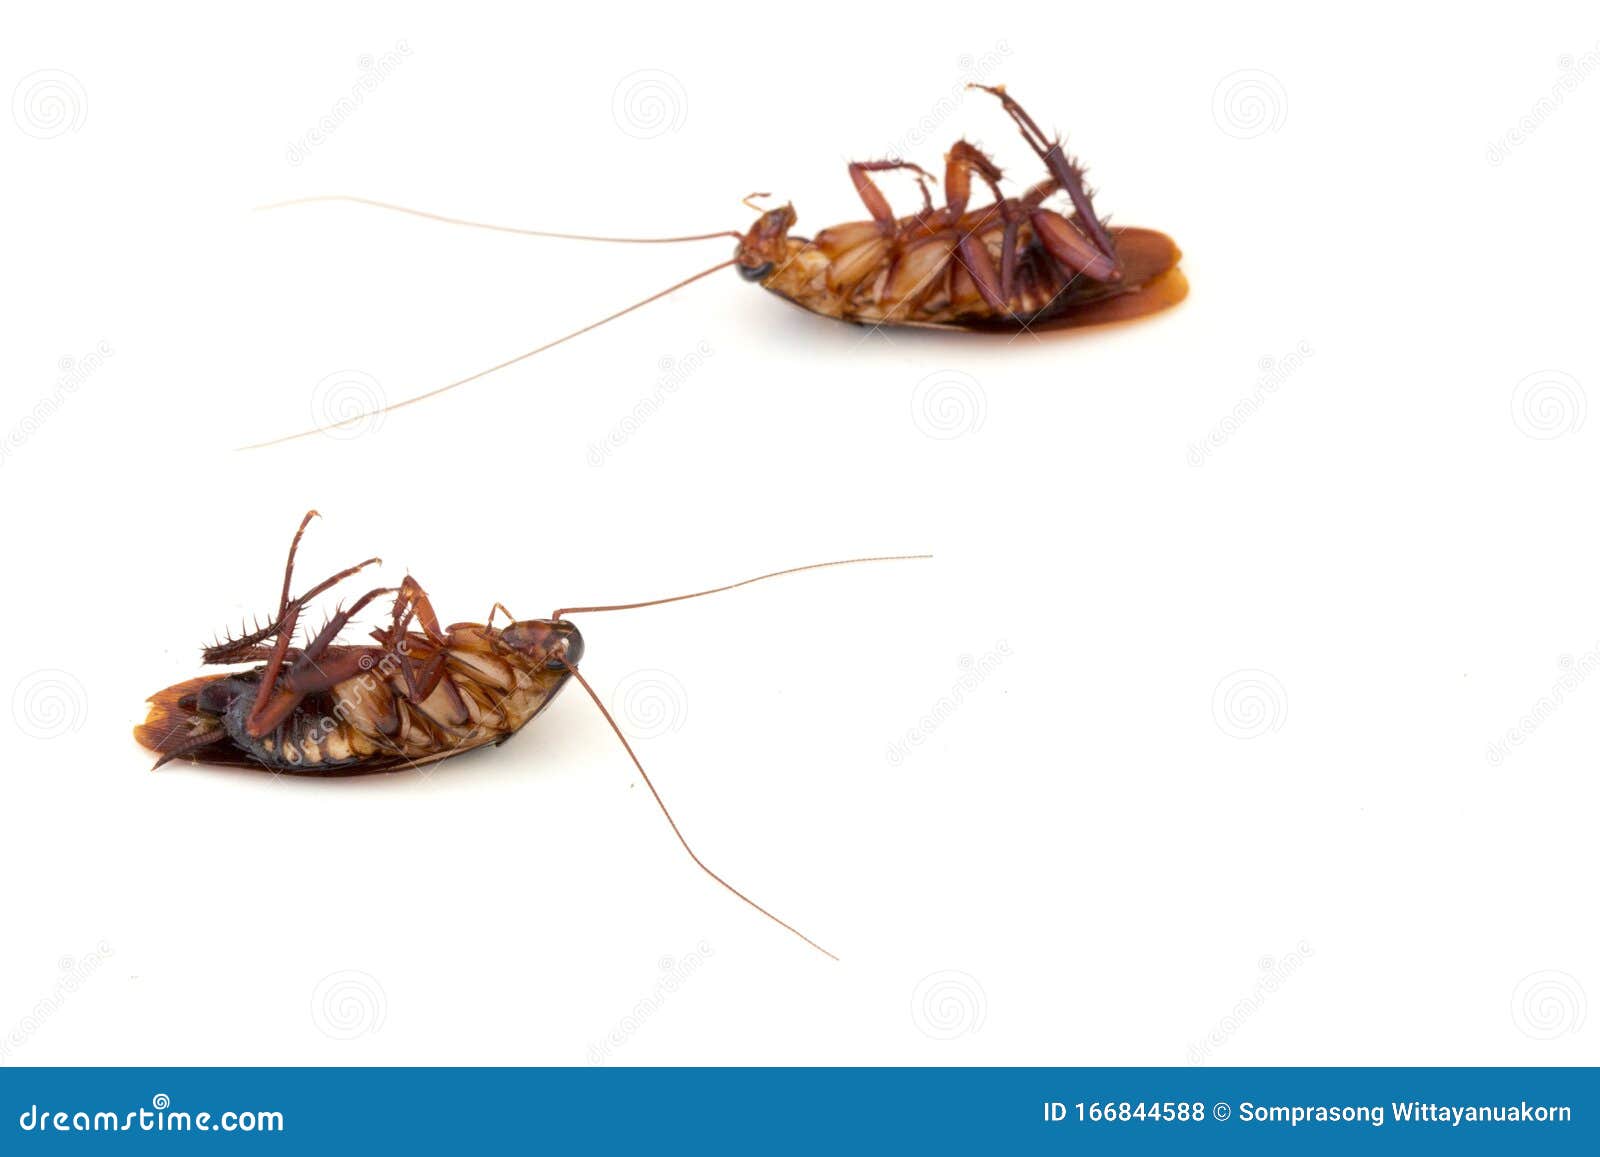 Dead Cockroach Isolated On White Background Stock Photo - Image of ...